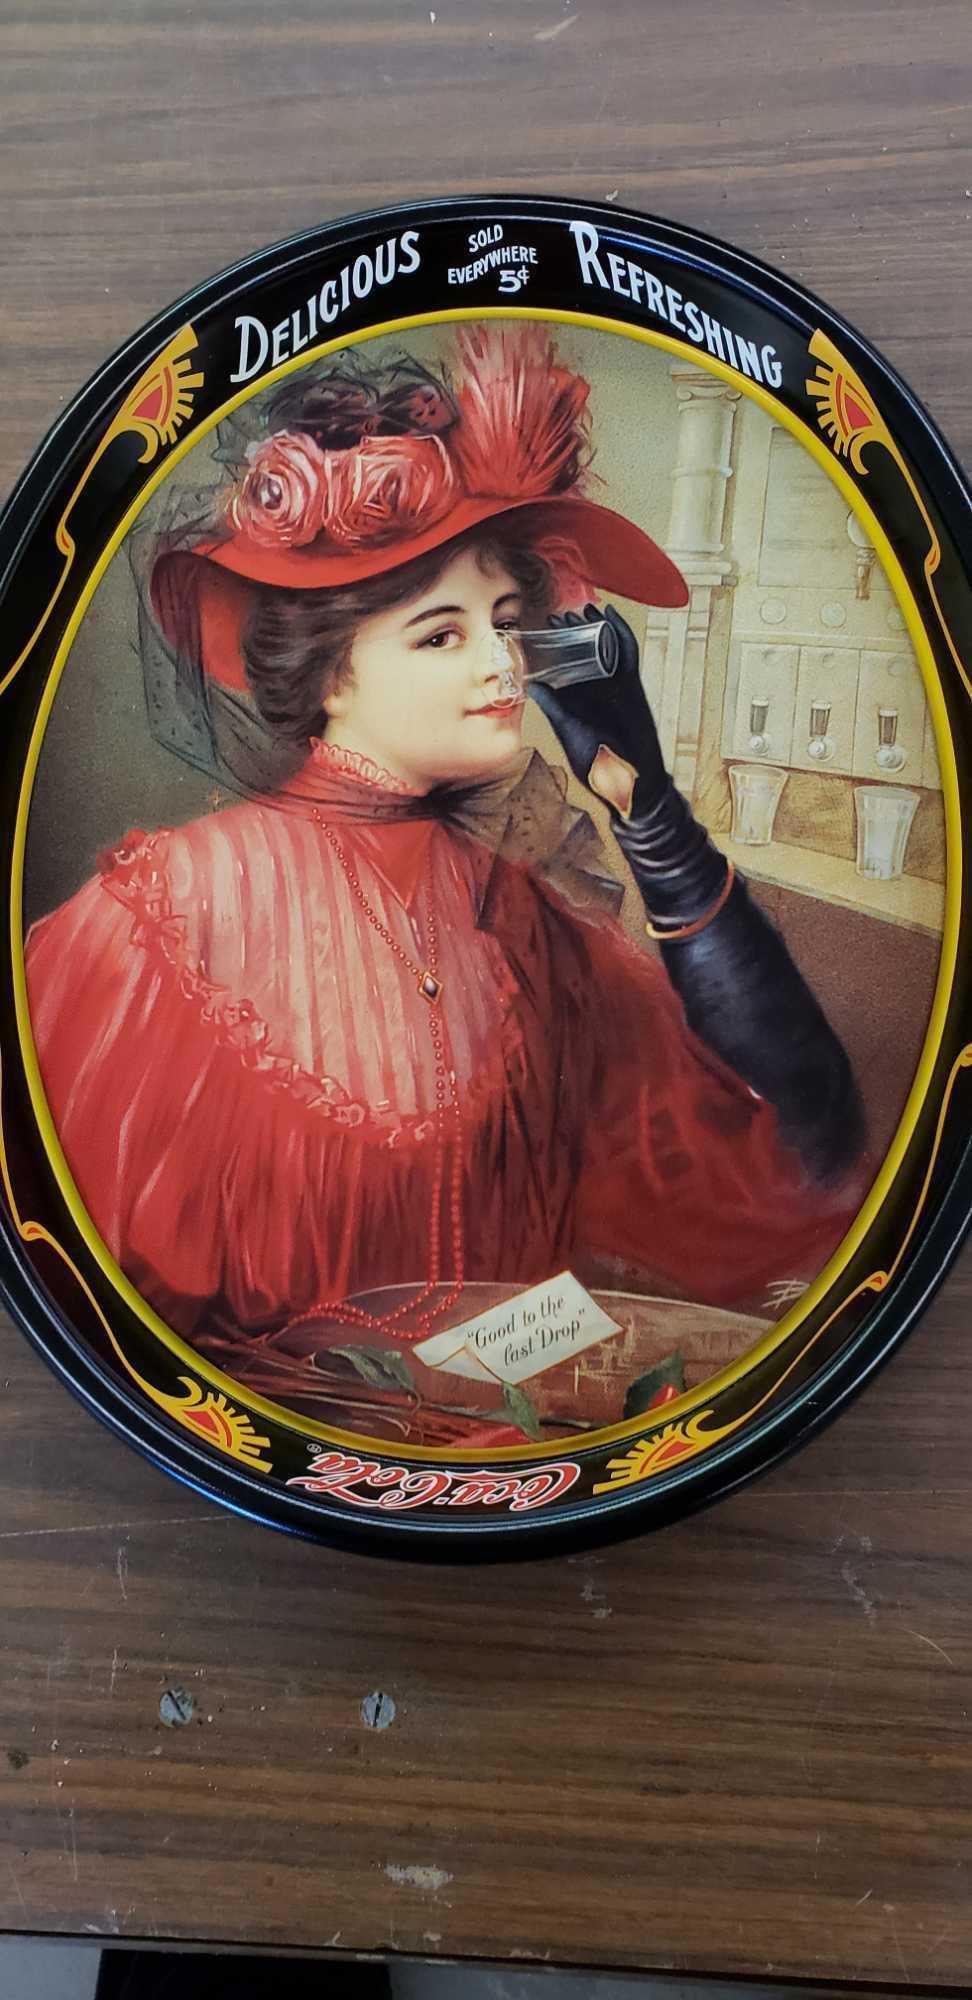 1987 Coca-cola Tin Tray "Lady in Red"